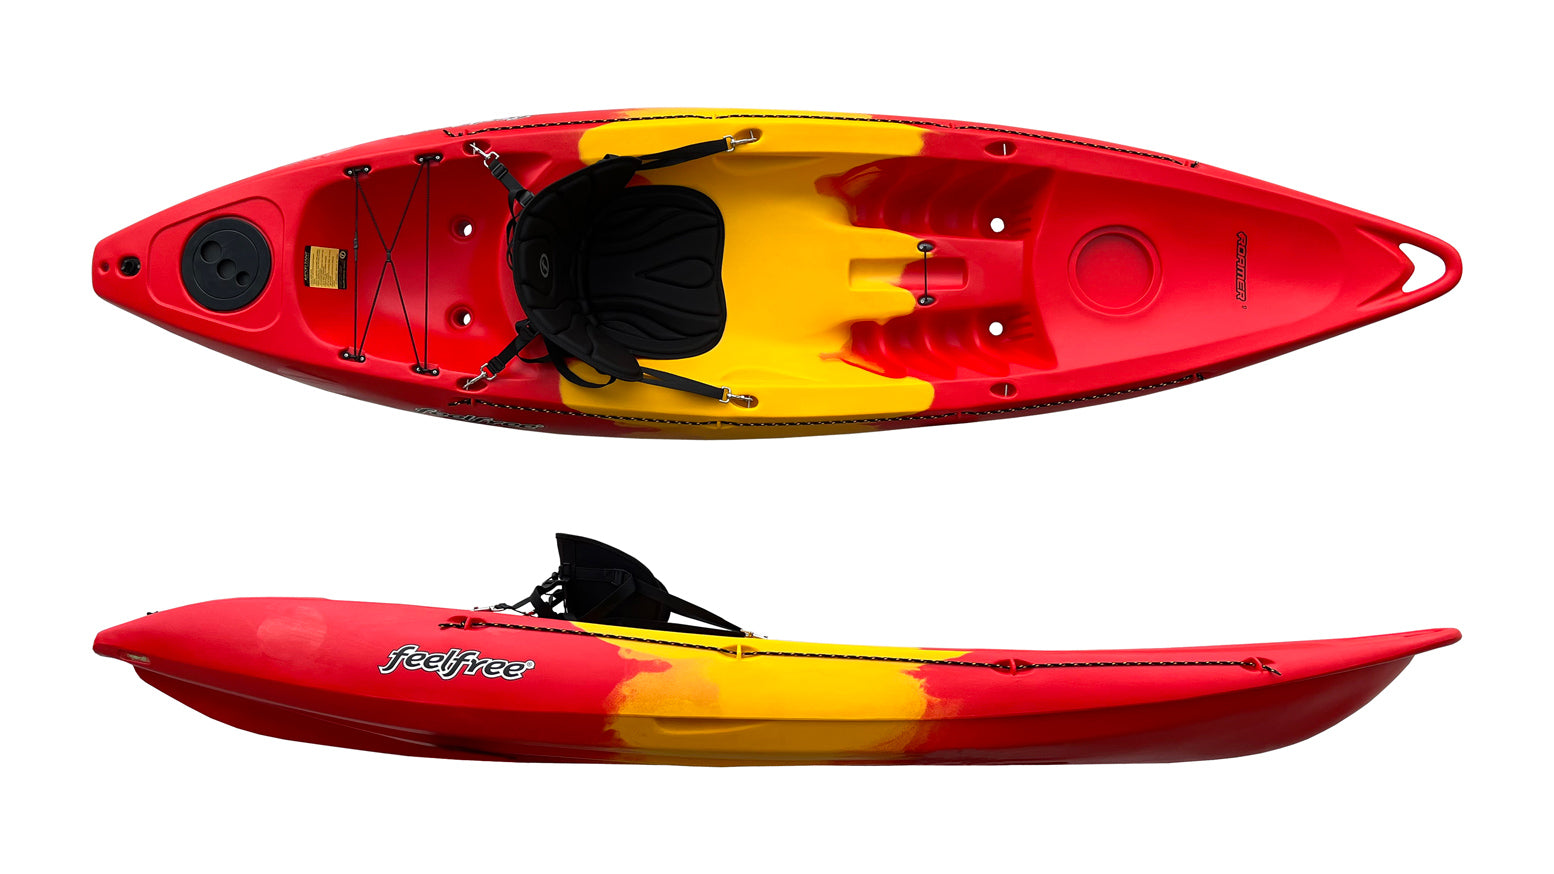 Roamer 1 in Red/Yellow by Feelfree Kayaks - Naitonwide delivery